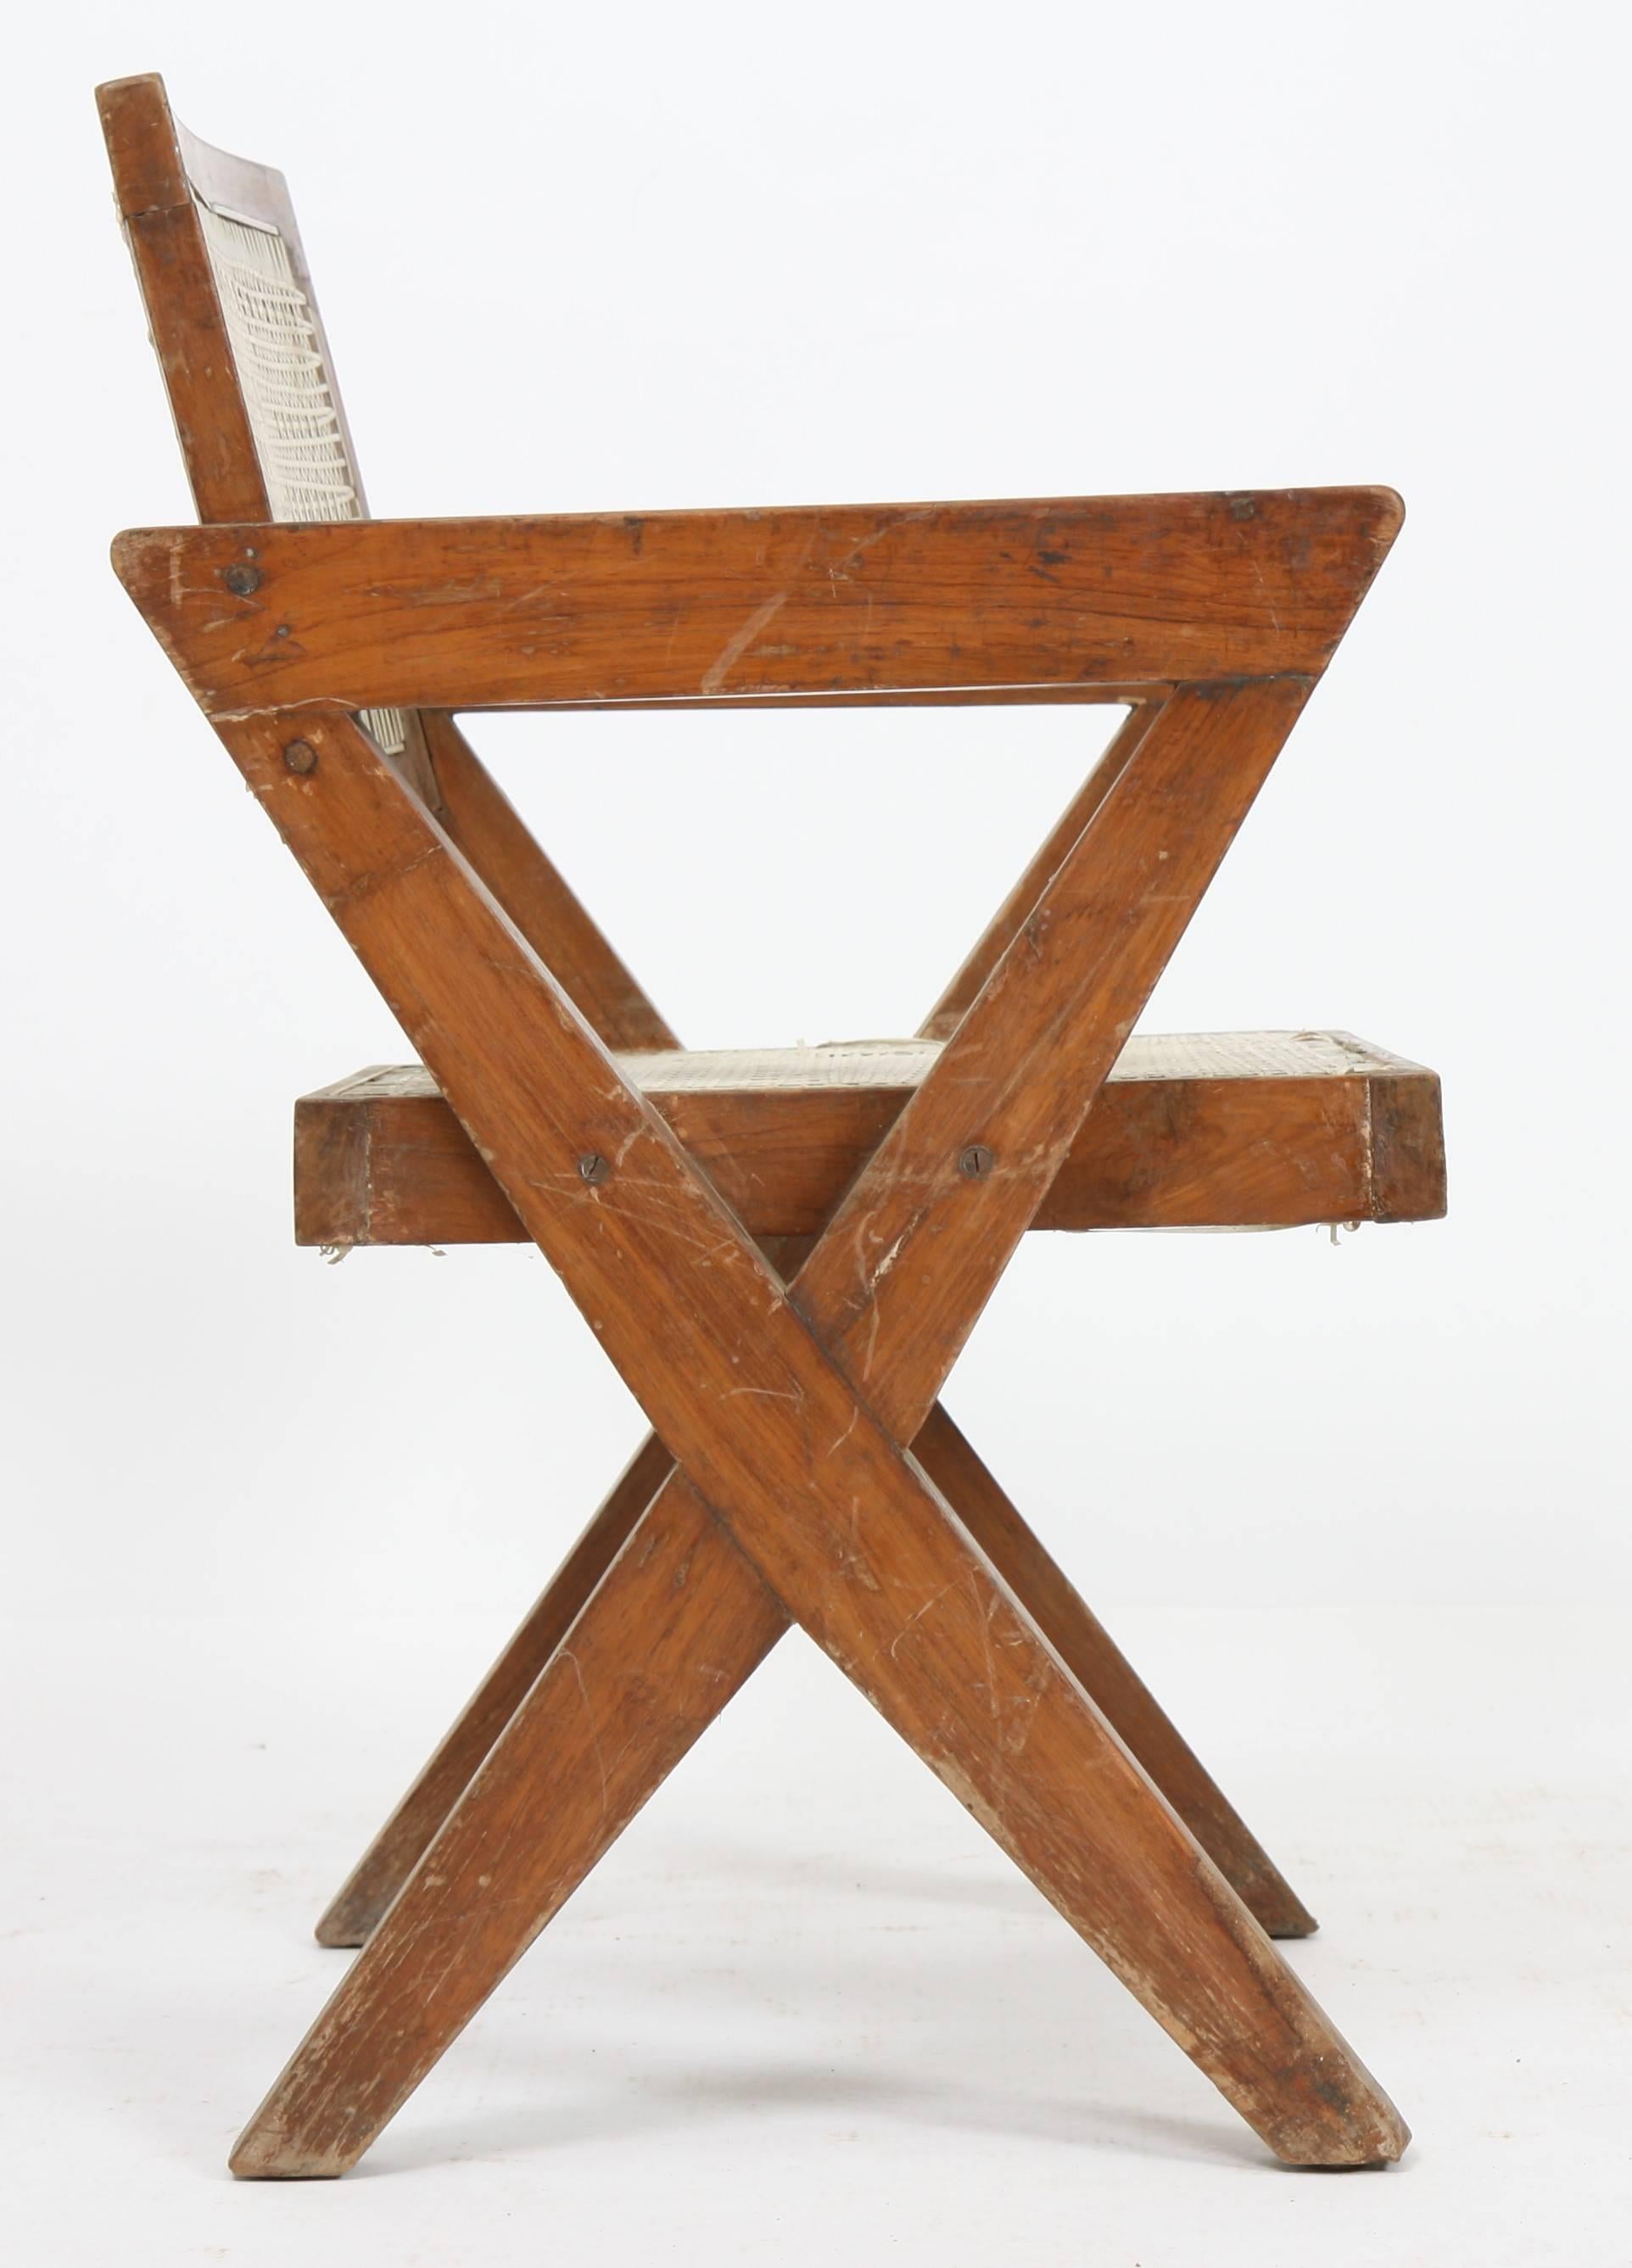 Pierre Jeanneret (1896-1967).
Armchair in teak, with bended and slightly curved back.
Detached armrests profiled on side compass feet.
Cane seat and back,
circa 1963-1964.
Dimension: Height 82cm x Length 55cm x Depth approx. 50 cm.
Origin: